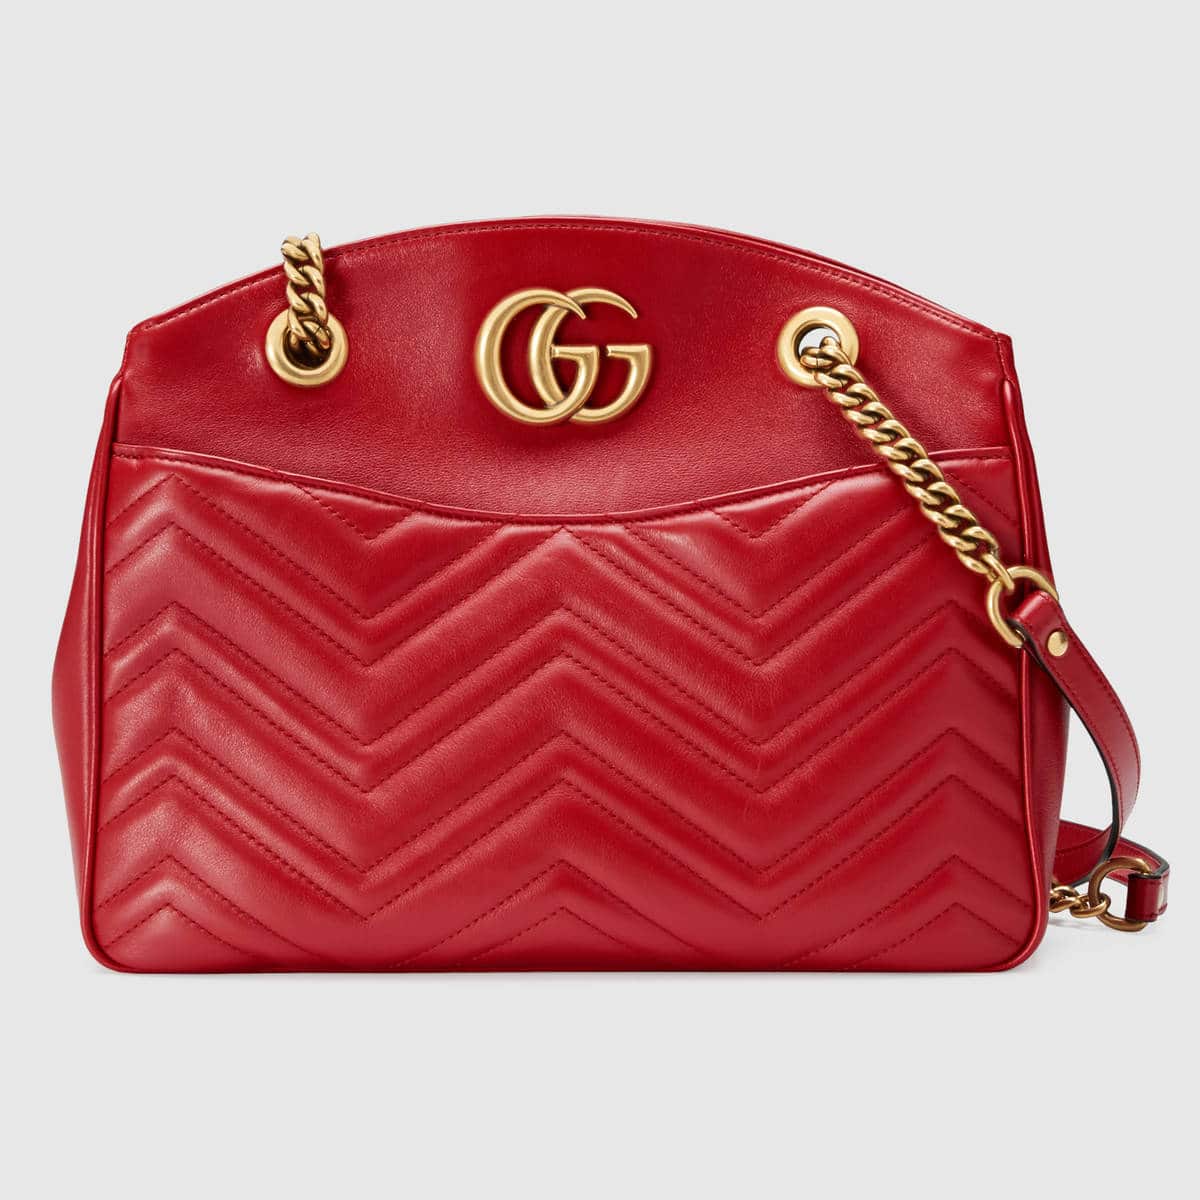 GUCCI introduces the new GG Marmont handbag